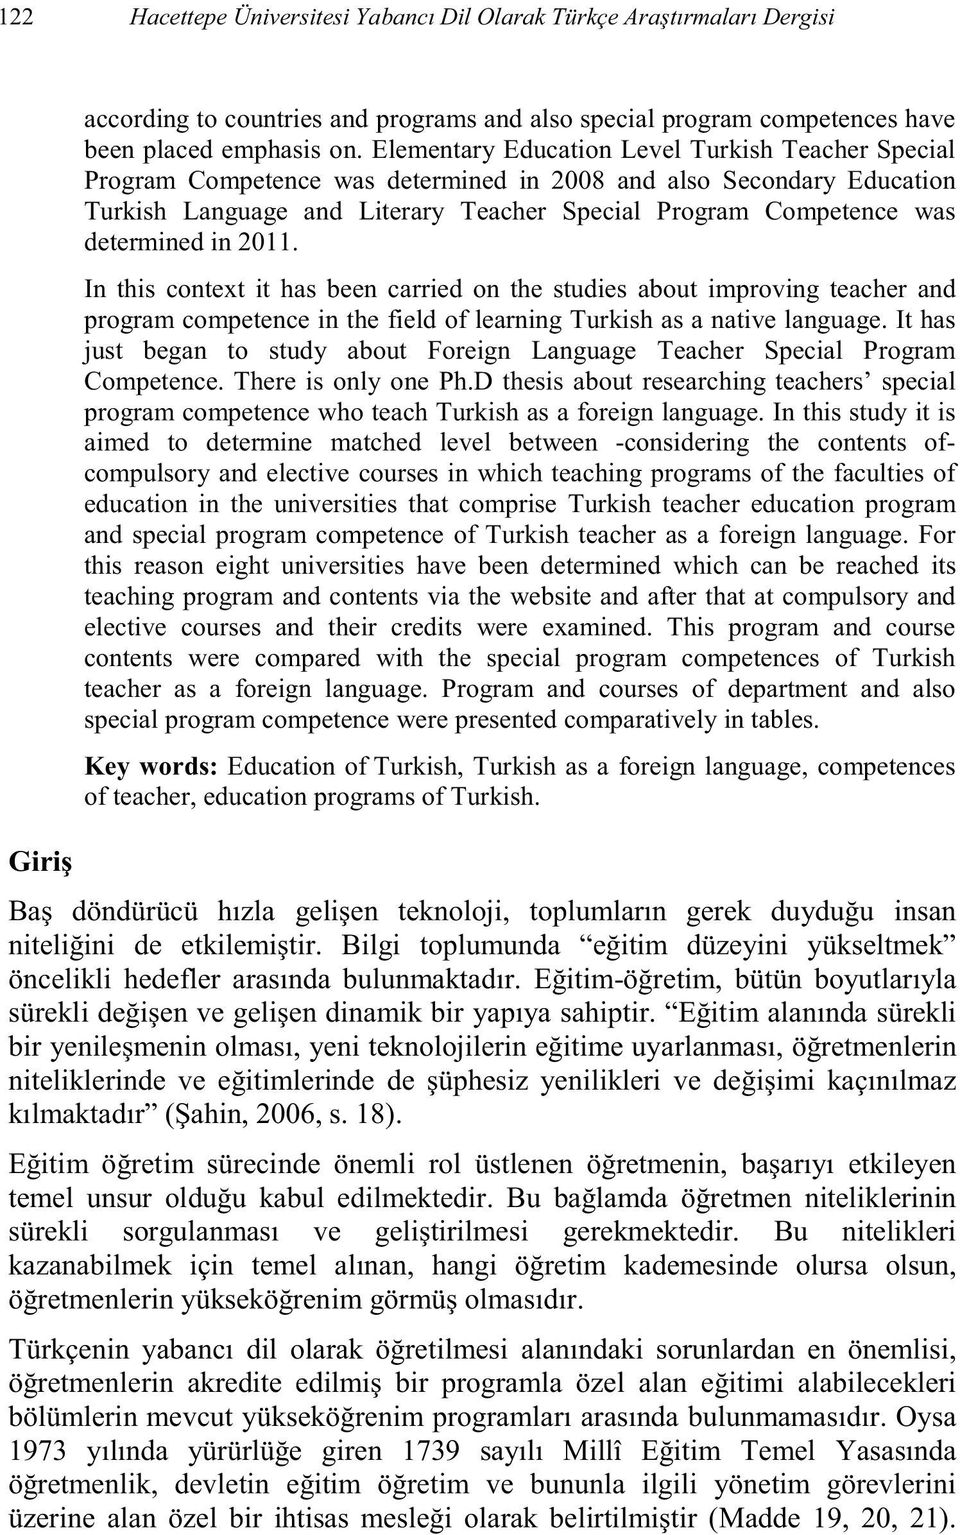 determined in 2011. In this context it has been carried on the studies about improving teacher and program competence in the field of learning Turkish as a native language.